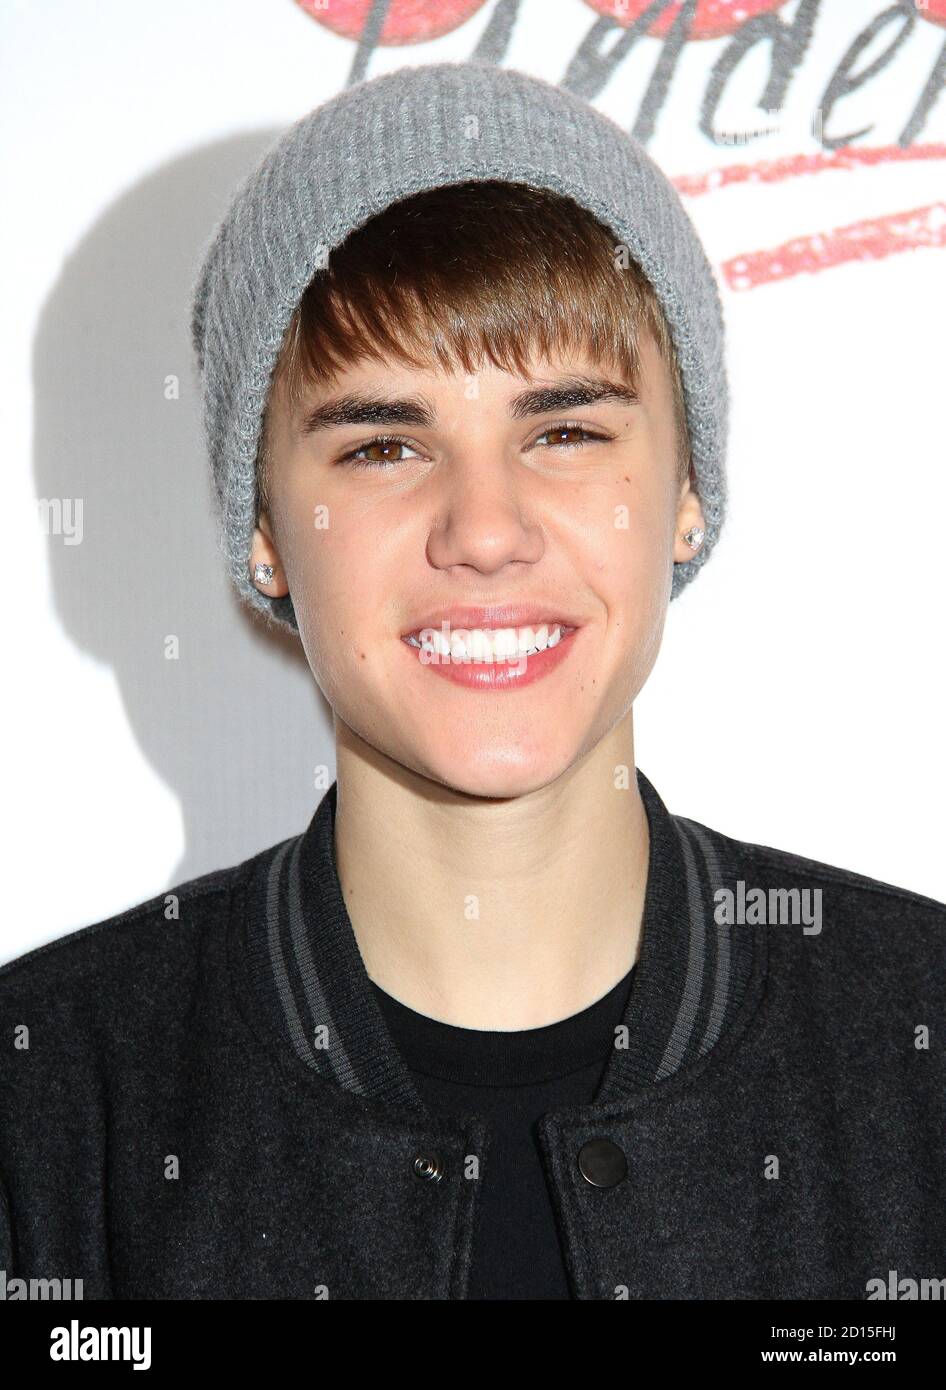 london-november-7-2011-justin-bieber-switching-on-christmas-lights-at-westfield-london-photocall-2D15FHJ.jpg